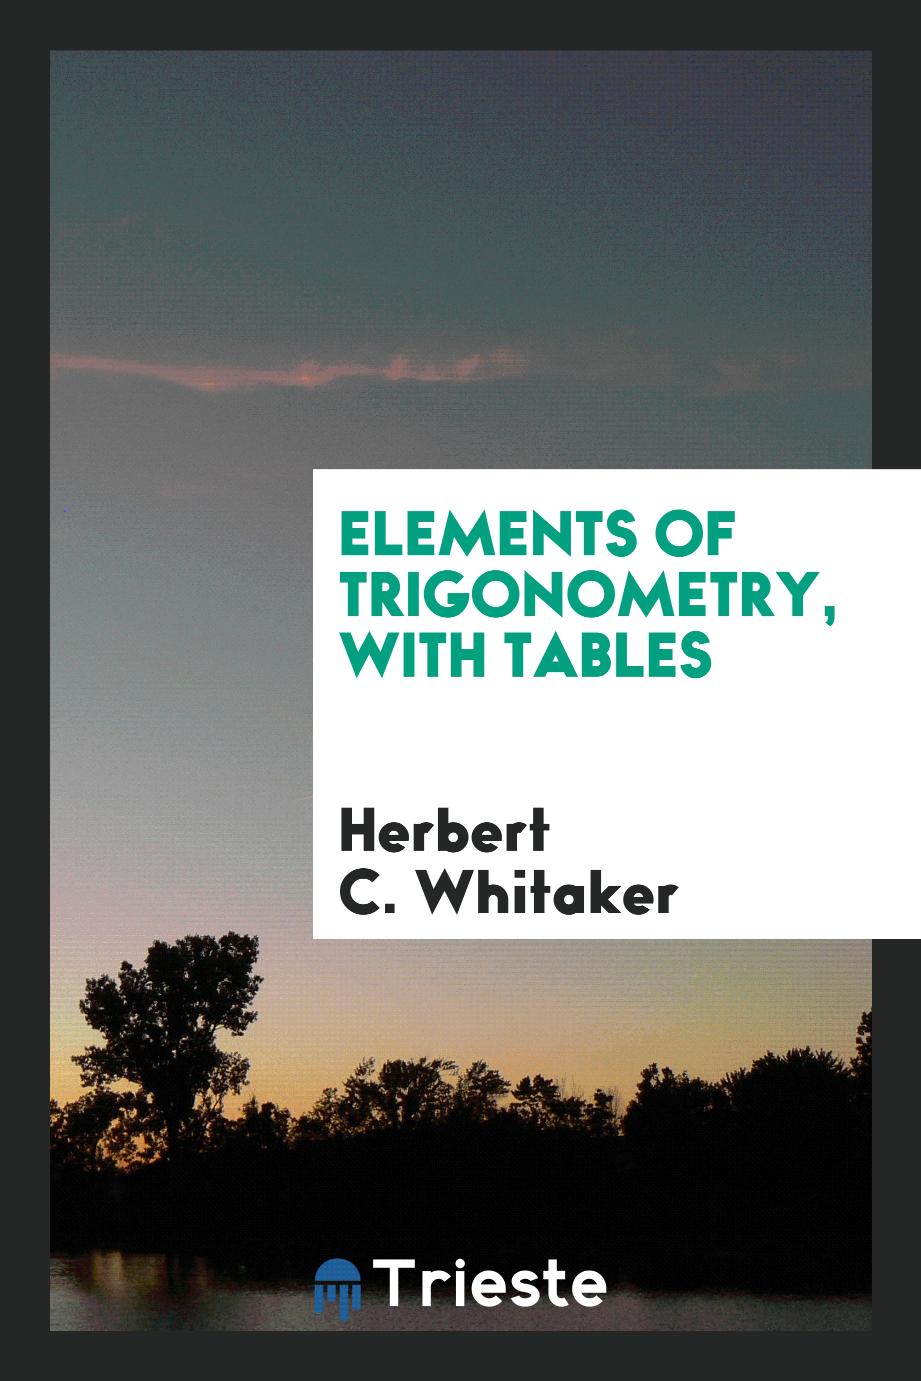 Elements of Trigonometry, with Tables